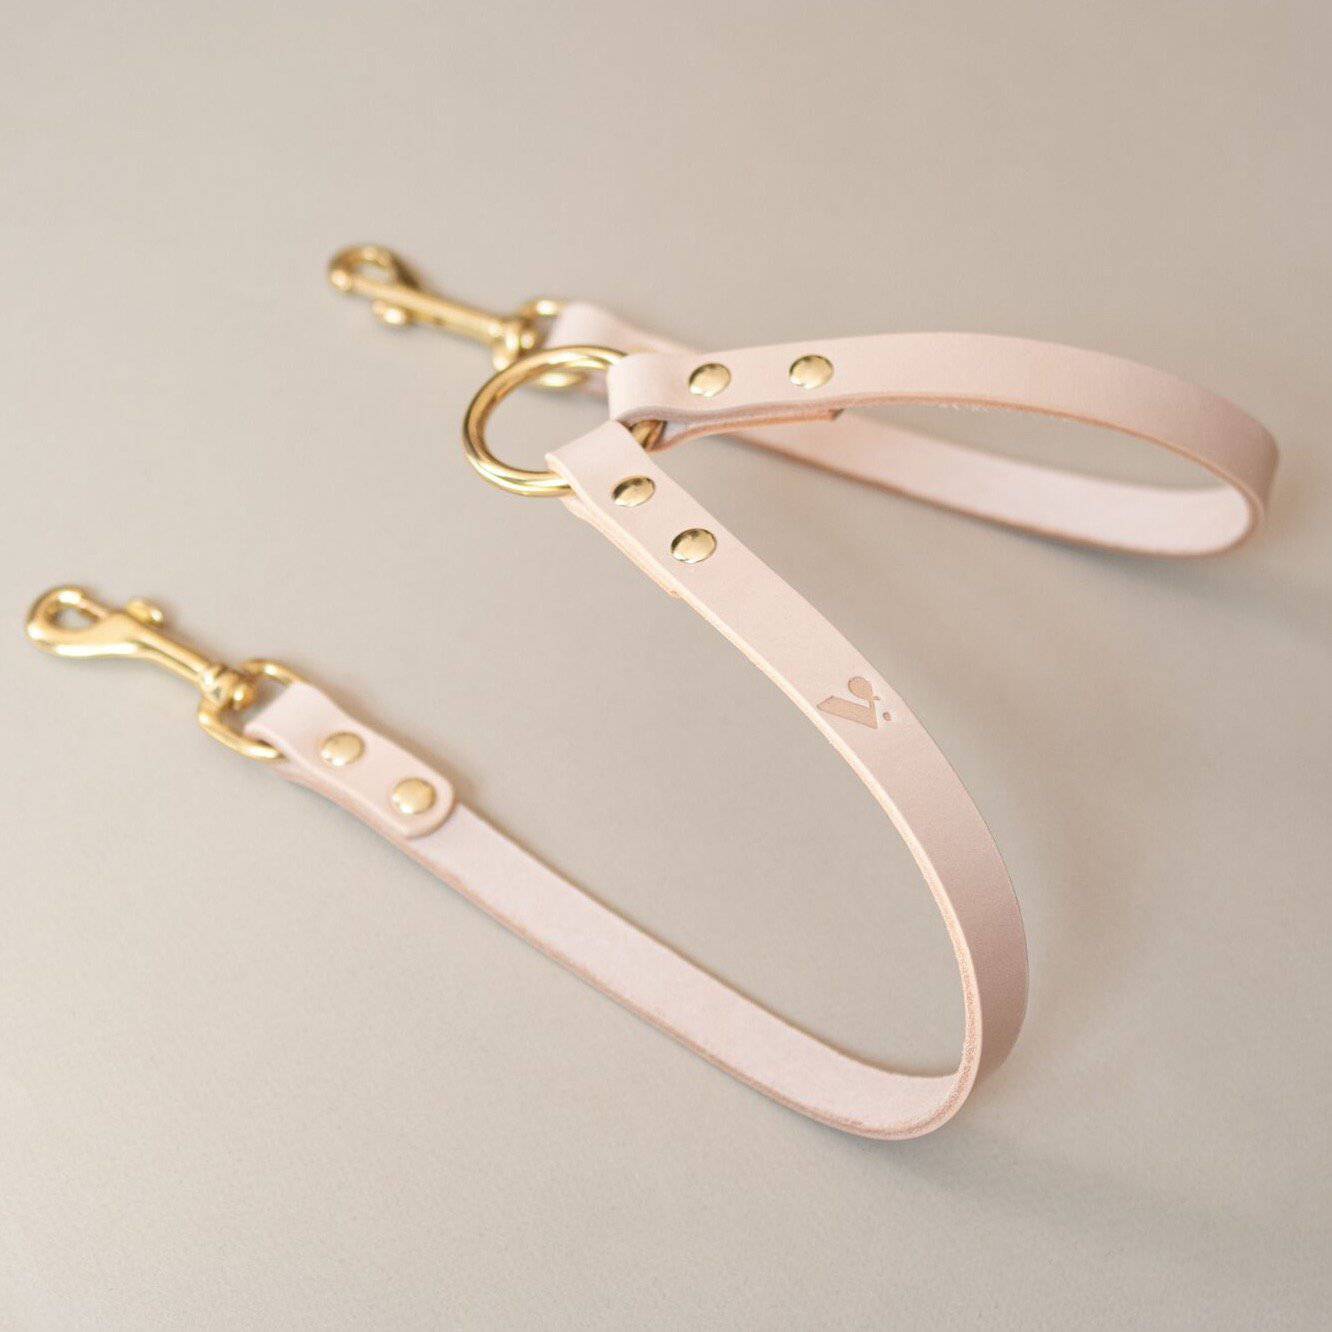 Nude - Leather Twin Lead Extension - Holler Brighton